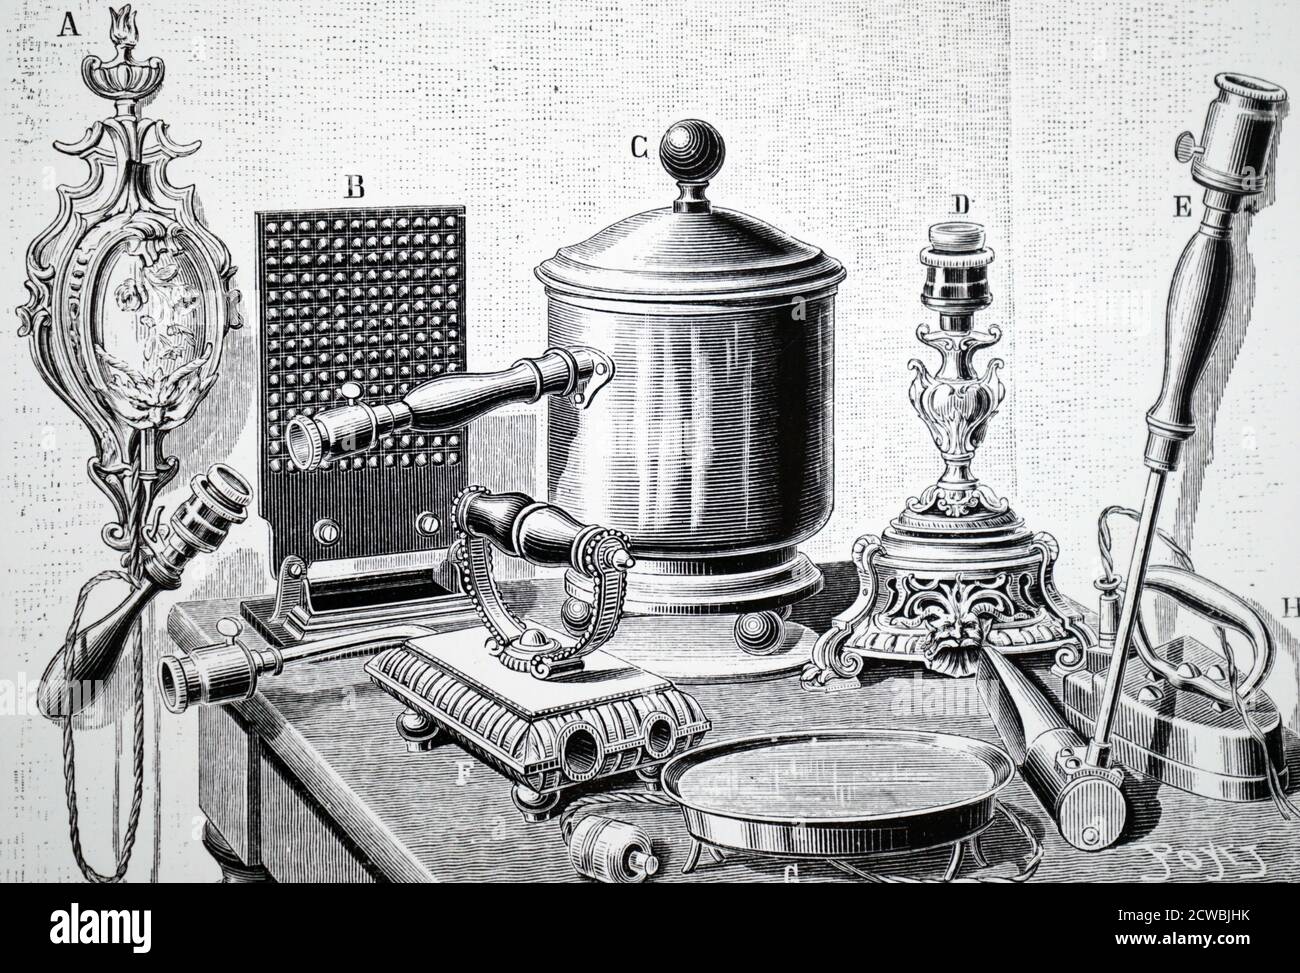 Engraving depicting various electrically powered heater appliances. A: Cigar lighter. B: Small electric heater. C: Bain-marie. D: Cigar lighter. E: Soldering iron. F: Heater for curling tongs. G: Frying pan. H: Iron. Stock Photo